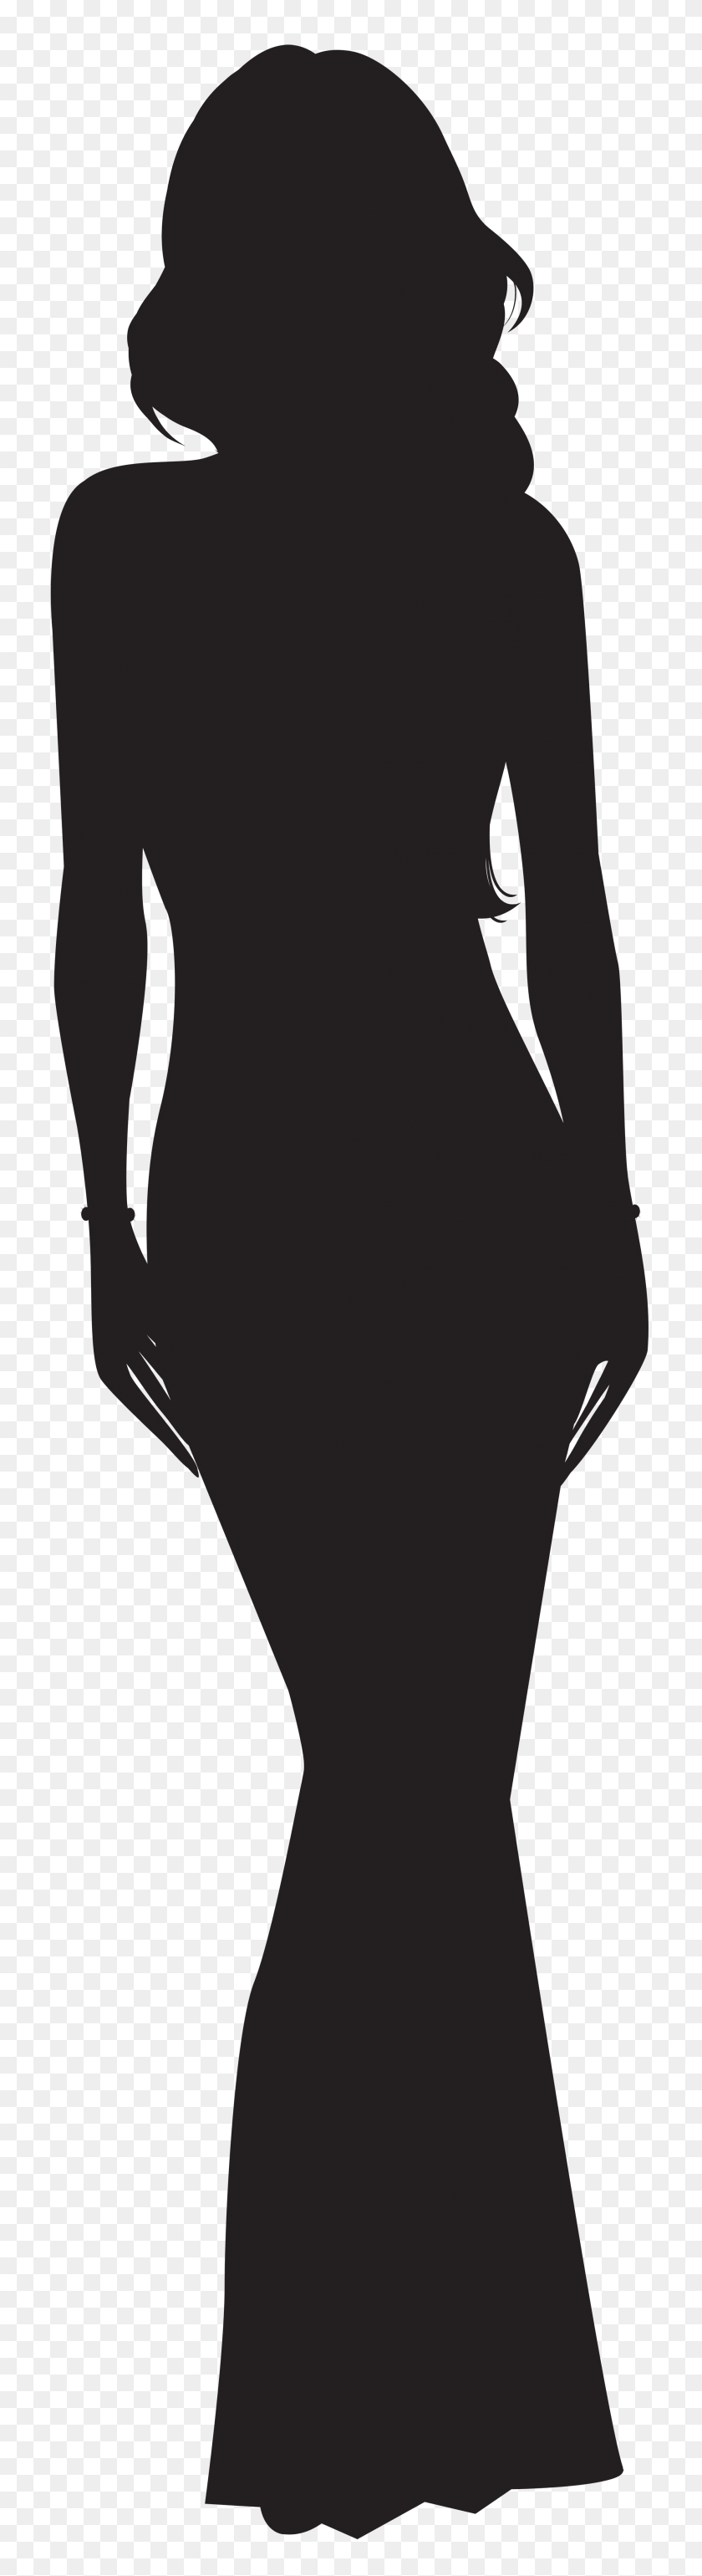 2065x8000 Afro Lady Clip Art Silhouettes - Afro Woman Clipart